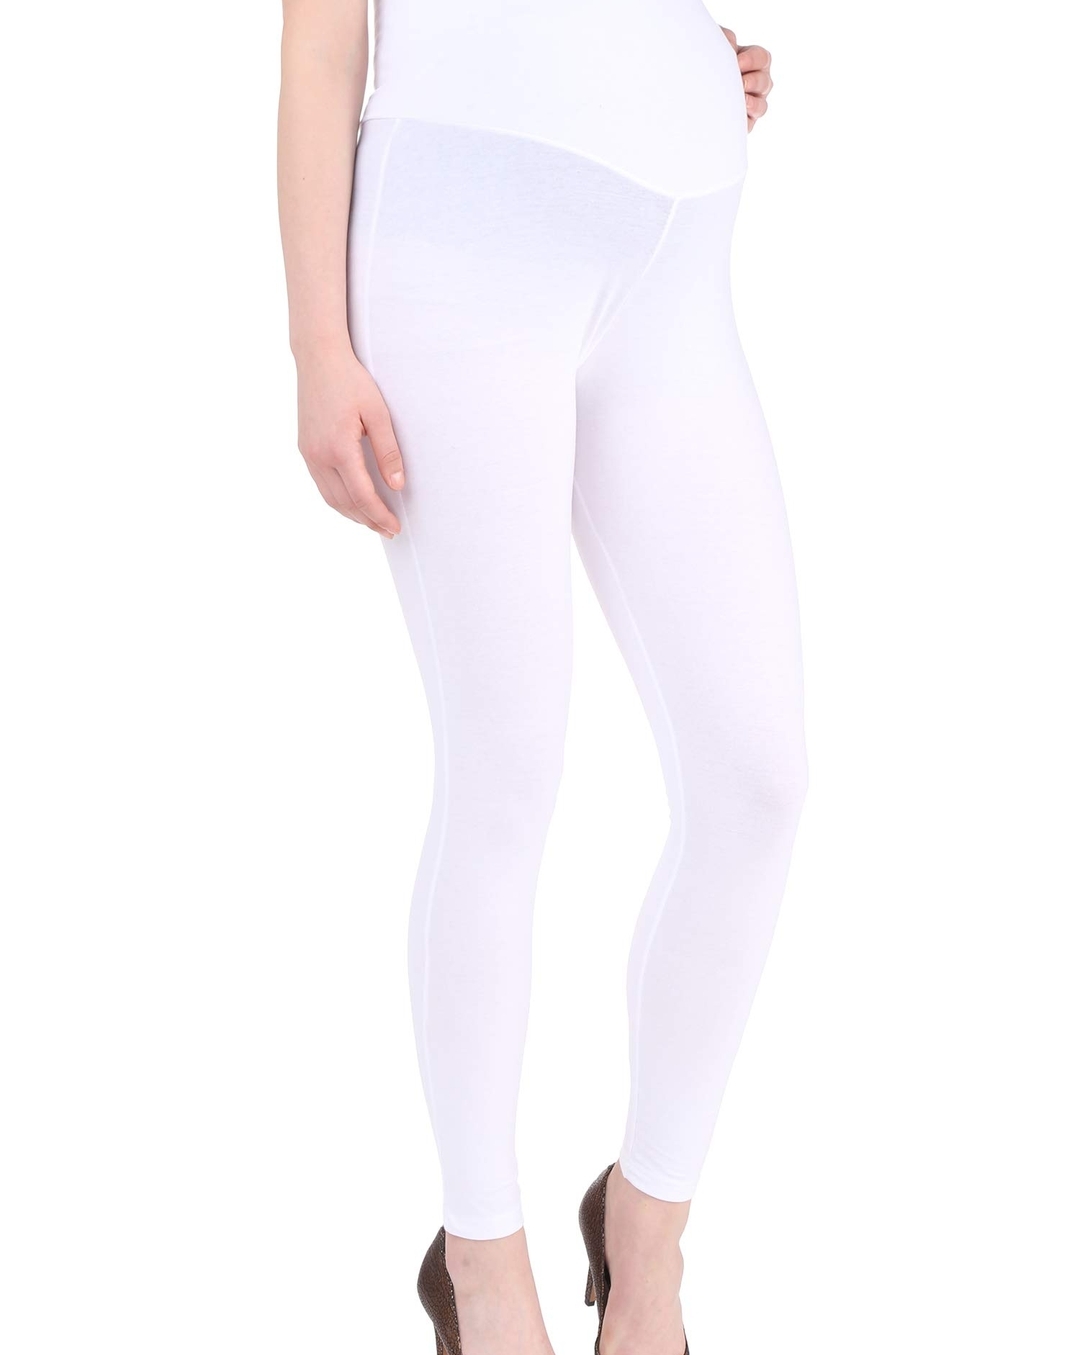 Get the Perfect Look with Prisma's White Shimmer Leggings